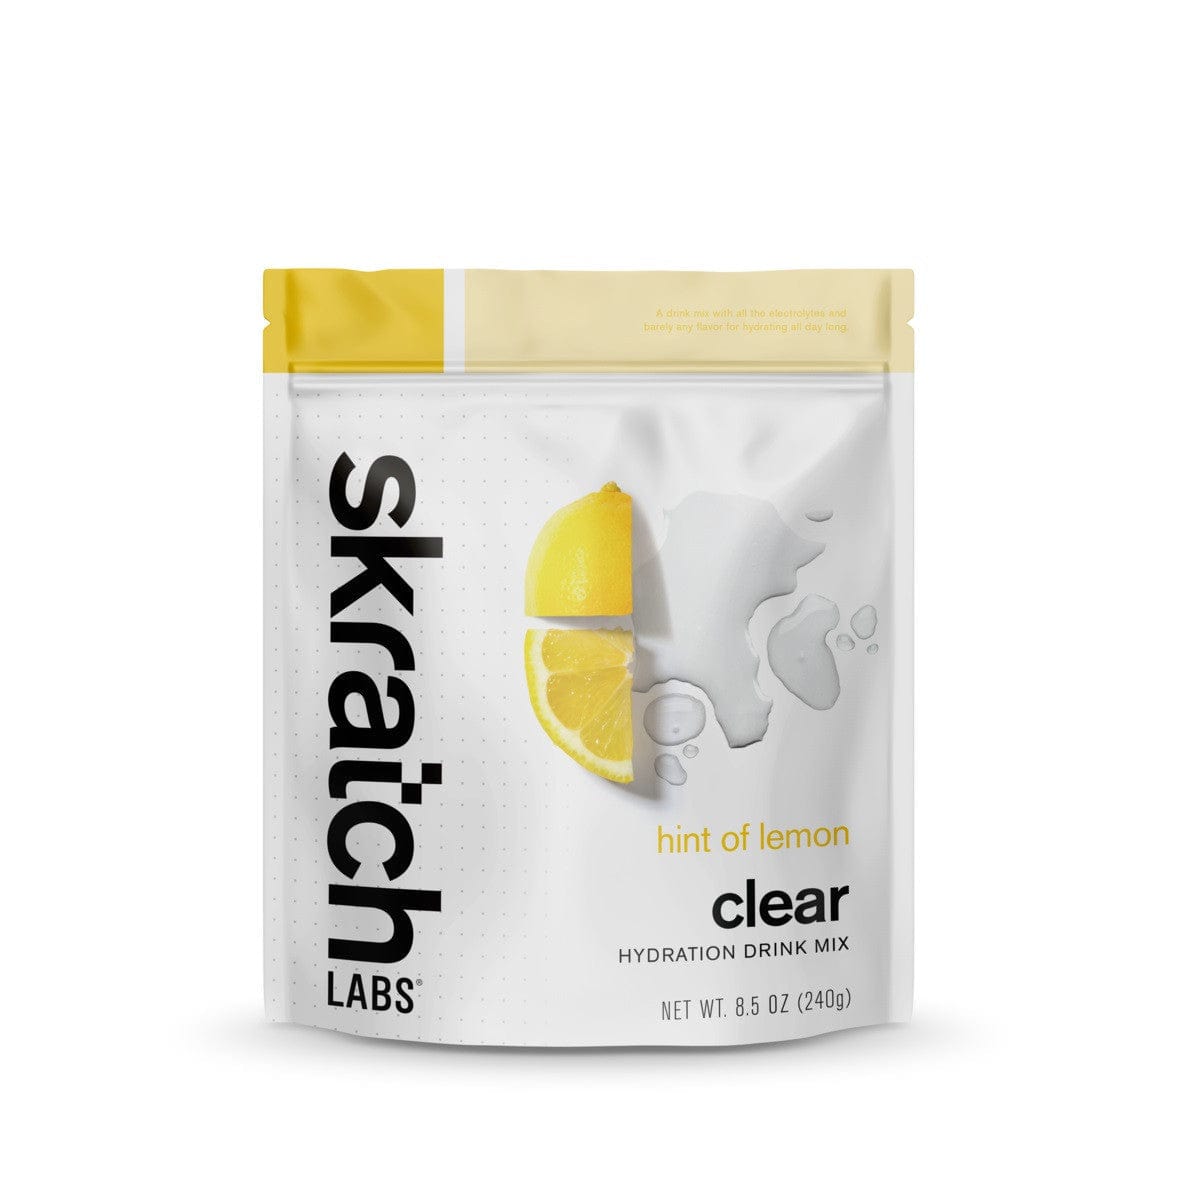 Skratch Labs Clear Drink Mix 240g Hint of Lemon Other - Nutrition - Drink Mixes